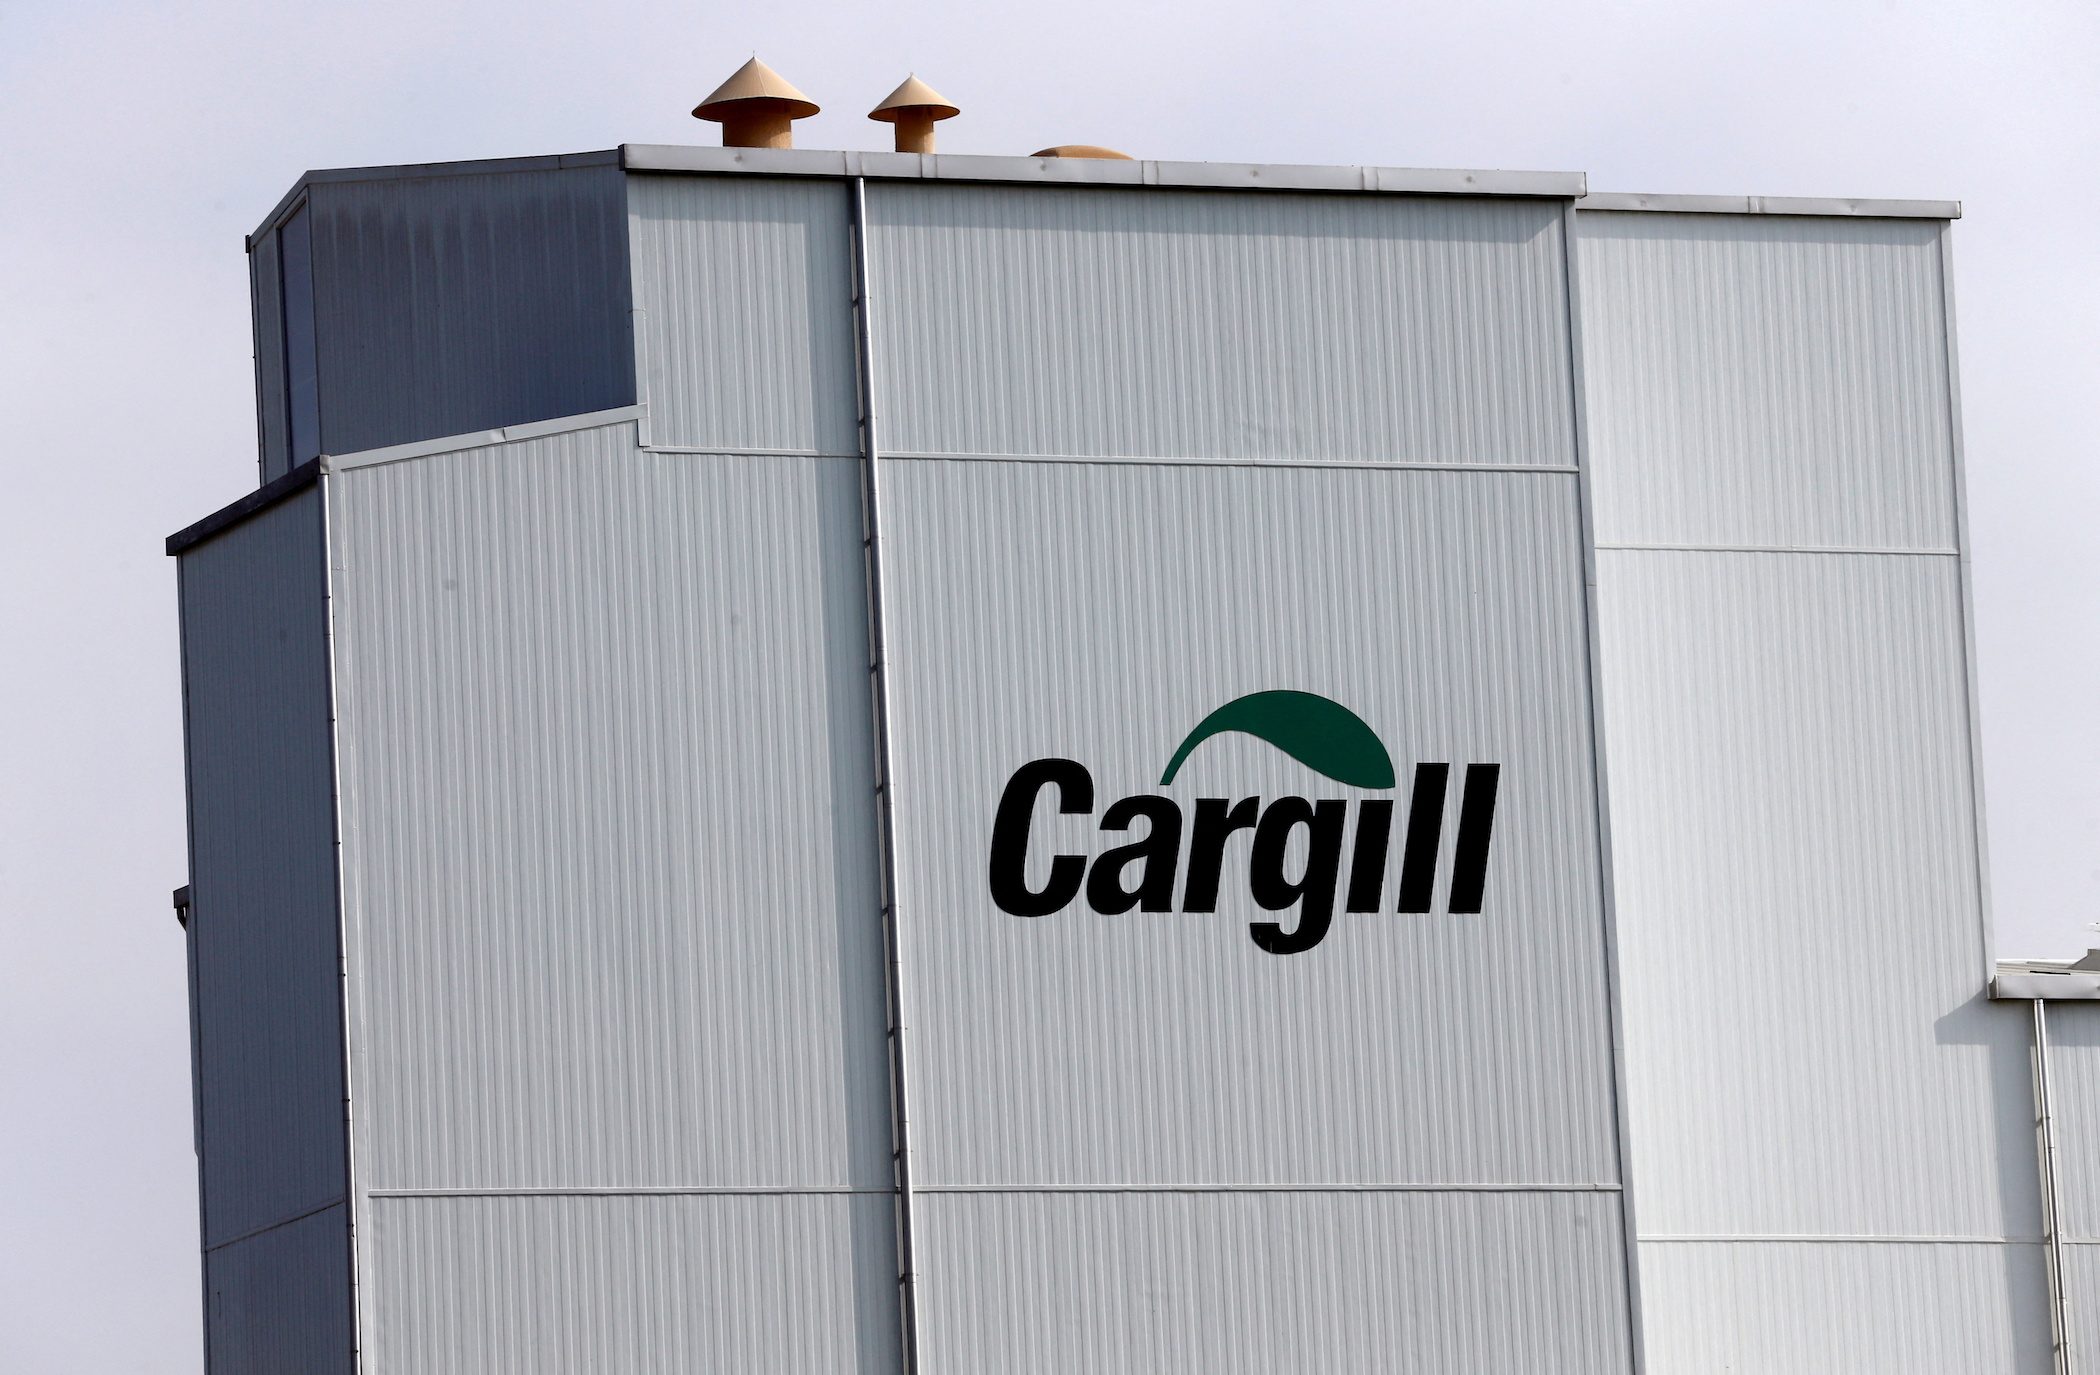 Cargill, ADM to scale back business in Russia, keep open food facilities